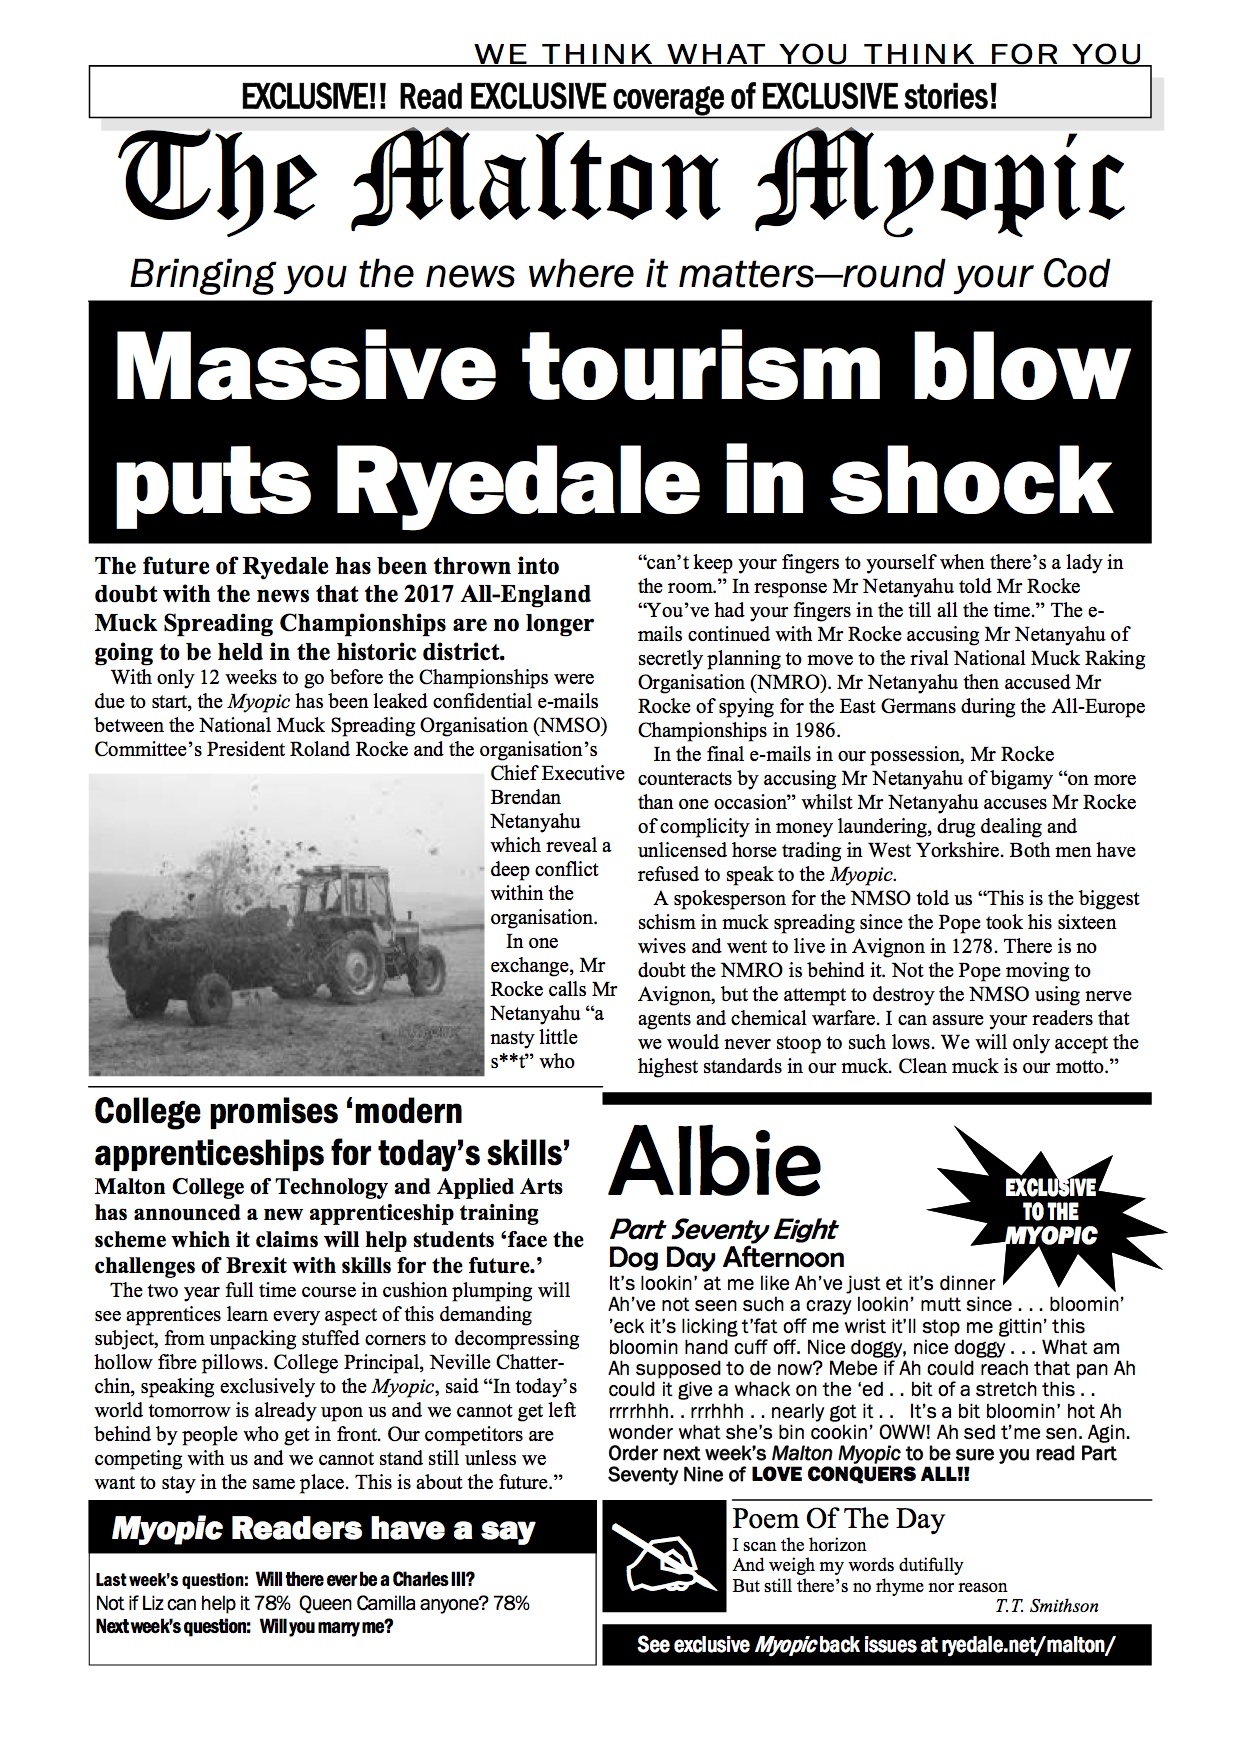 Tourism in Ryedale